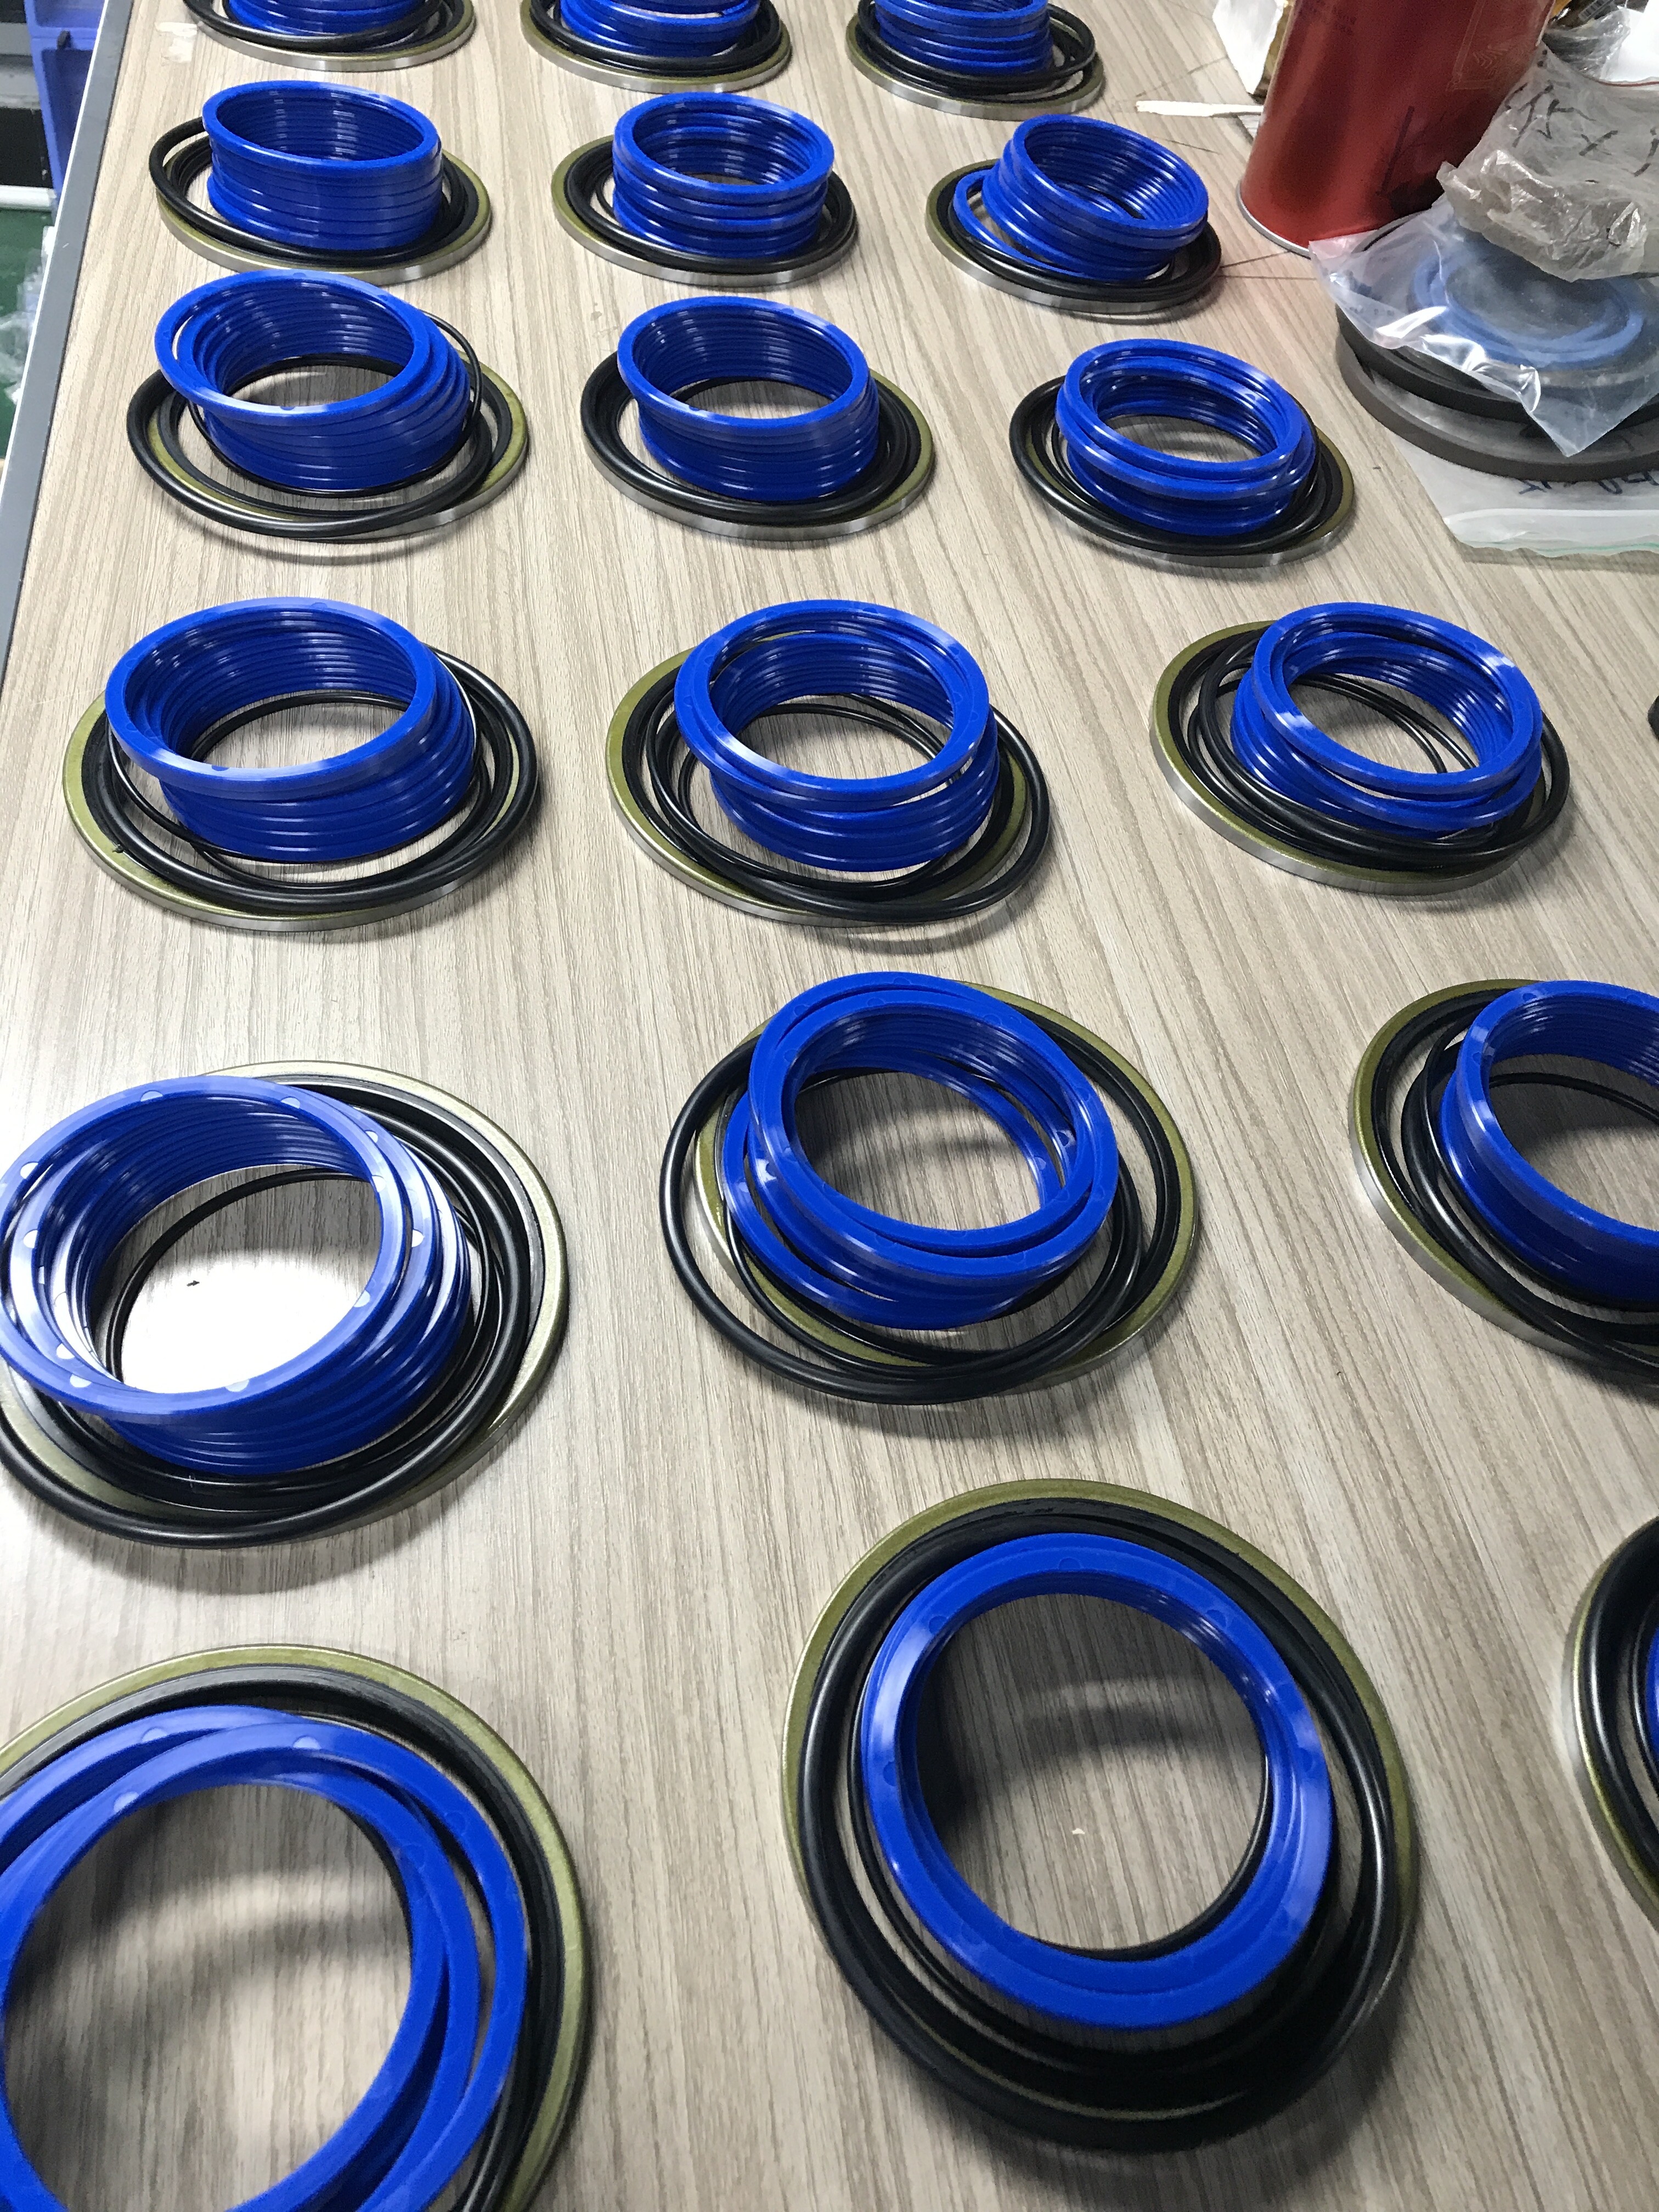 Supplier of excavator, bulldozer, engine, hydraulic pump, electrical components, oil seal accessories in China.